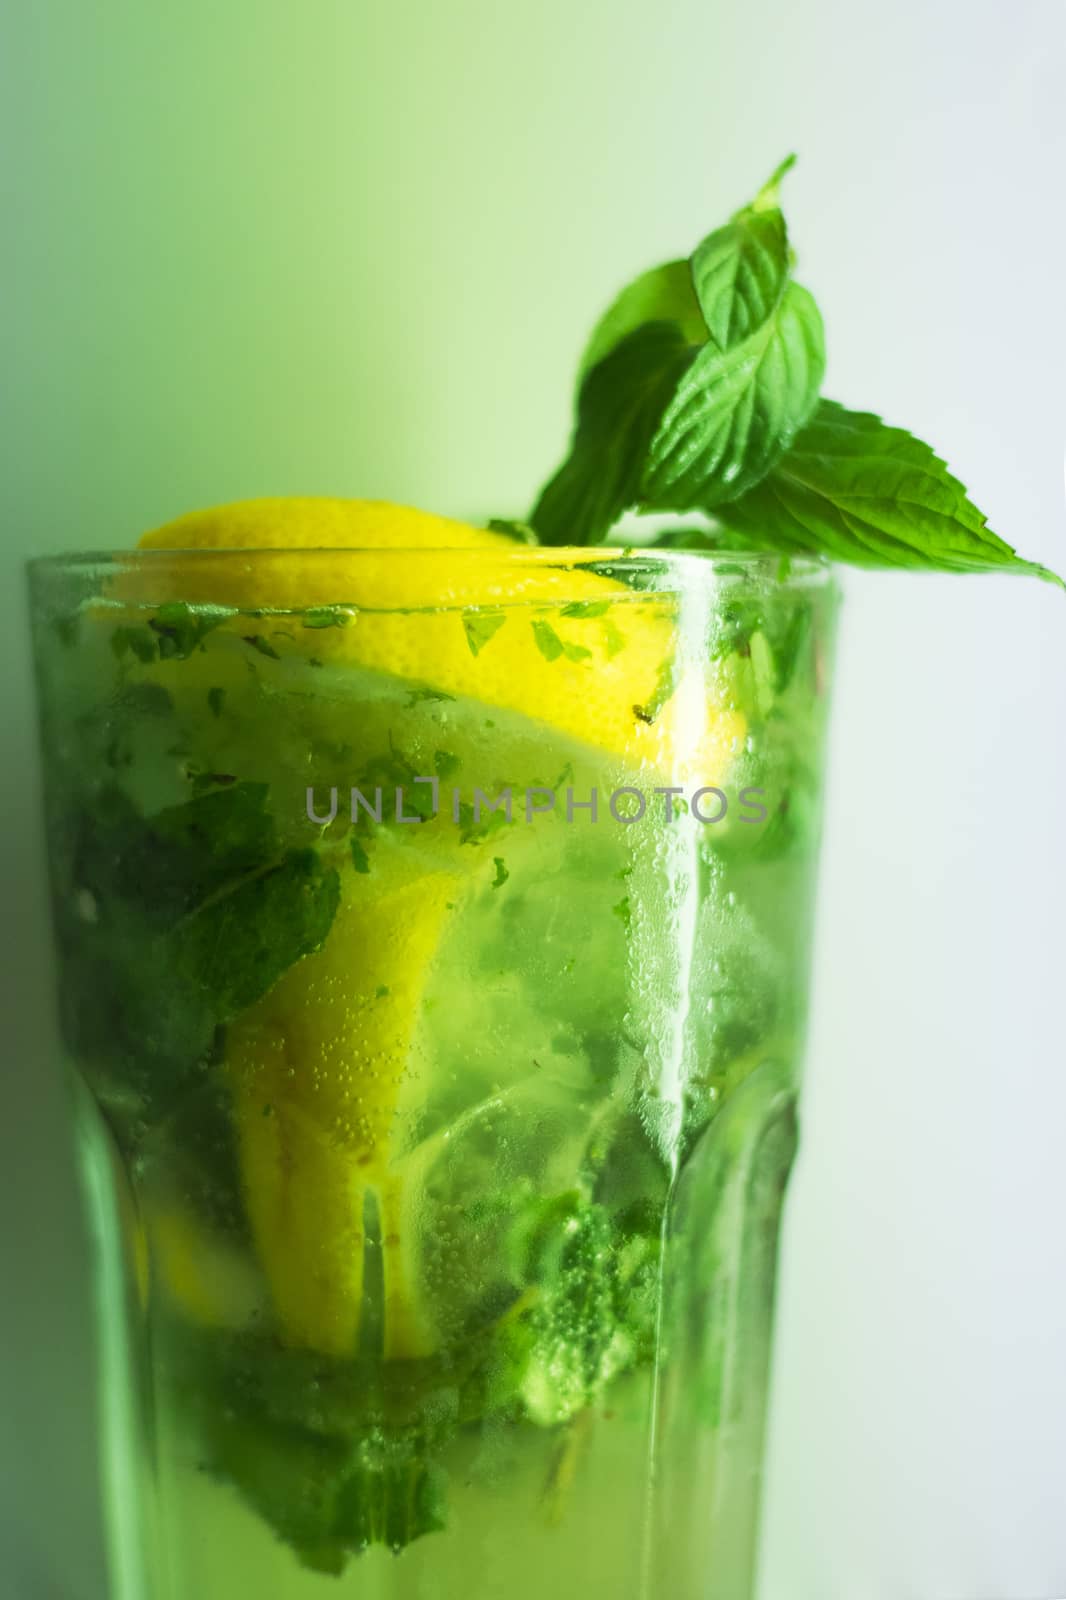 Mojito cocktail in glass,fresh drink, ready to drink, mint, lemon and lime with alcohol and ice cubes. Green color. white background.